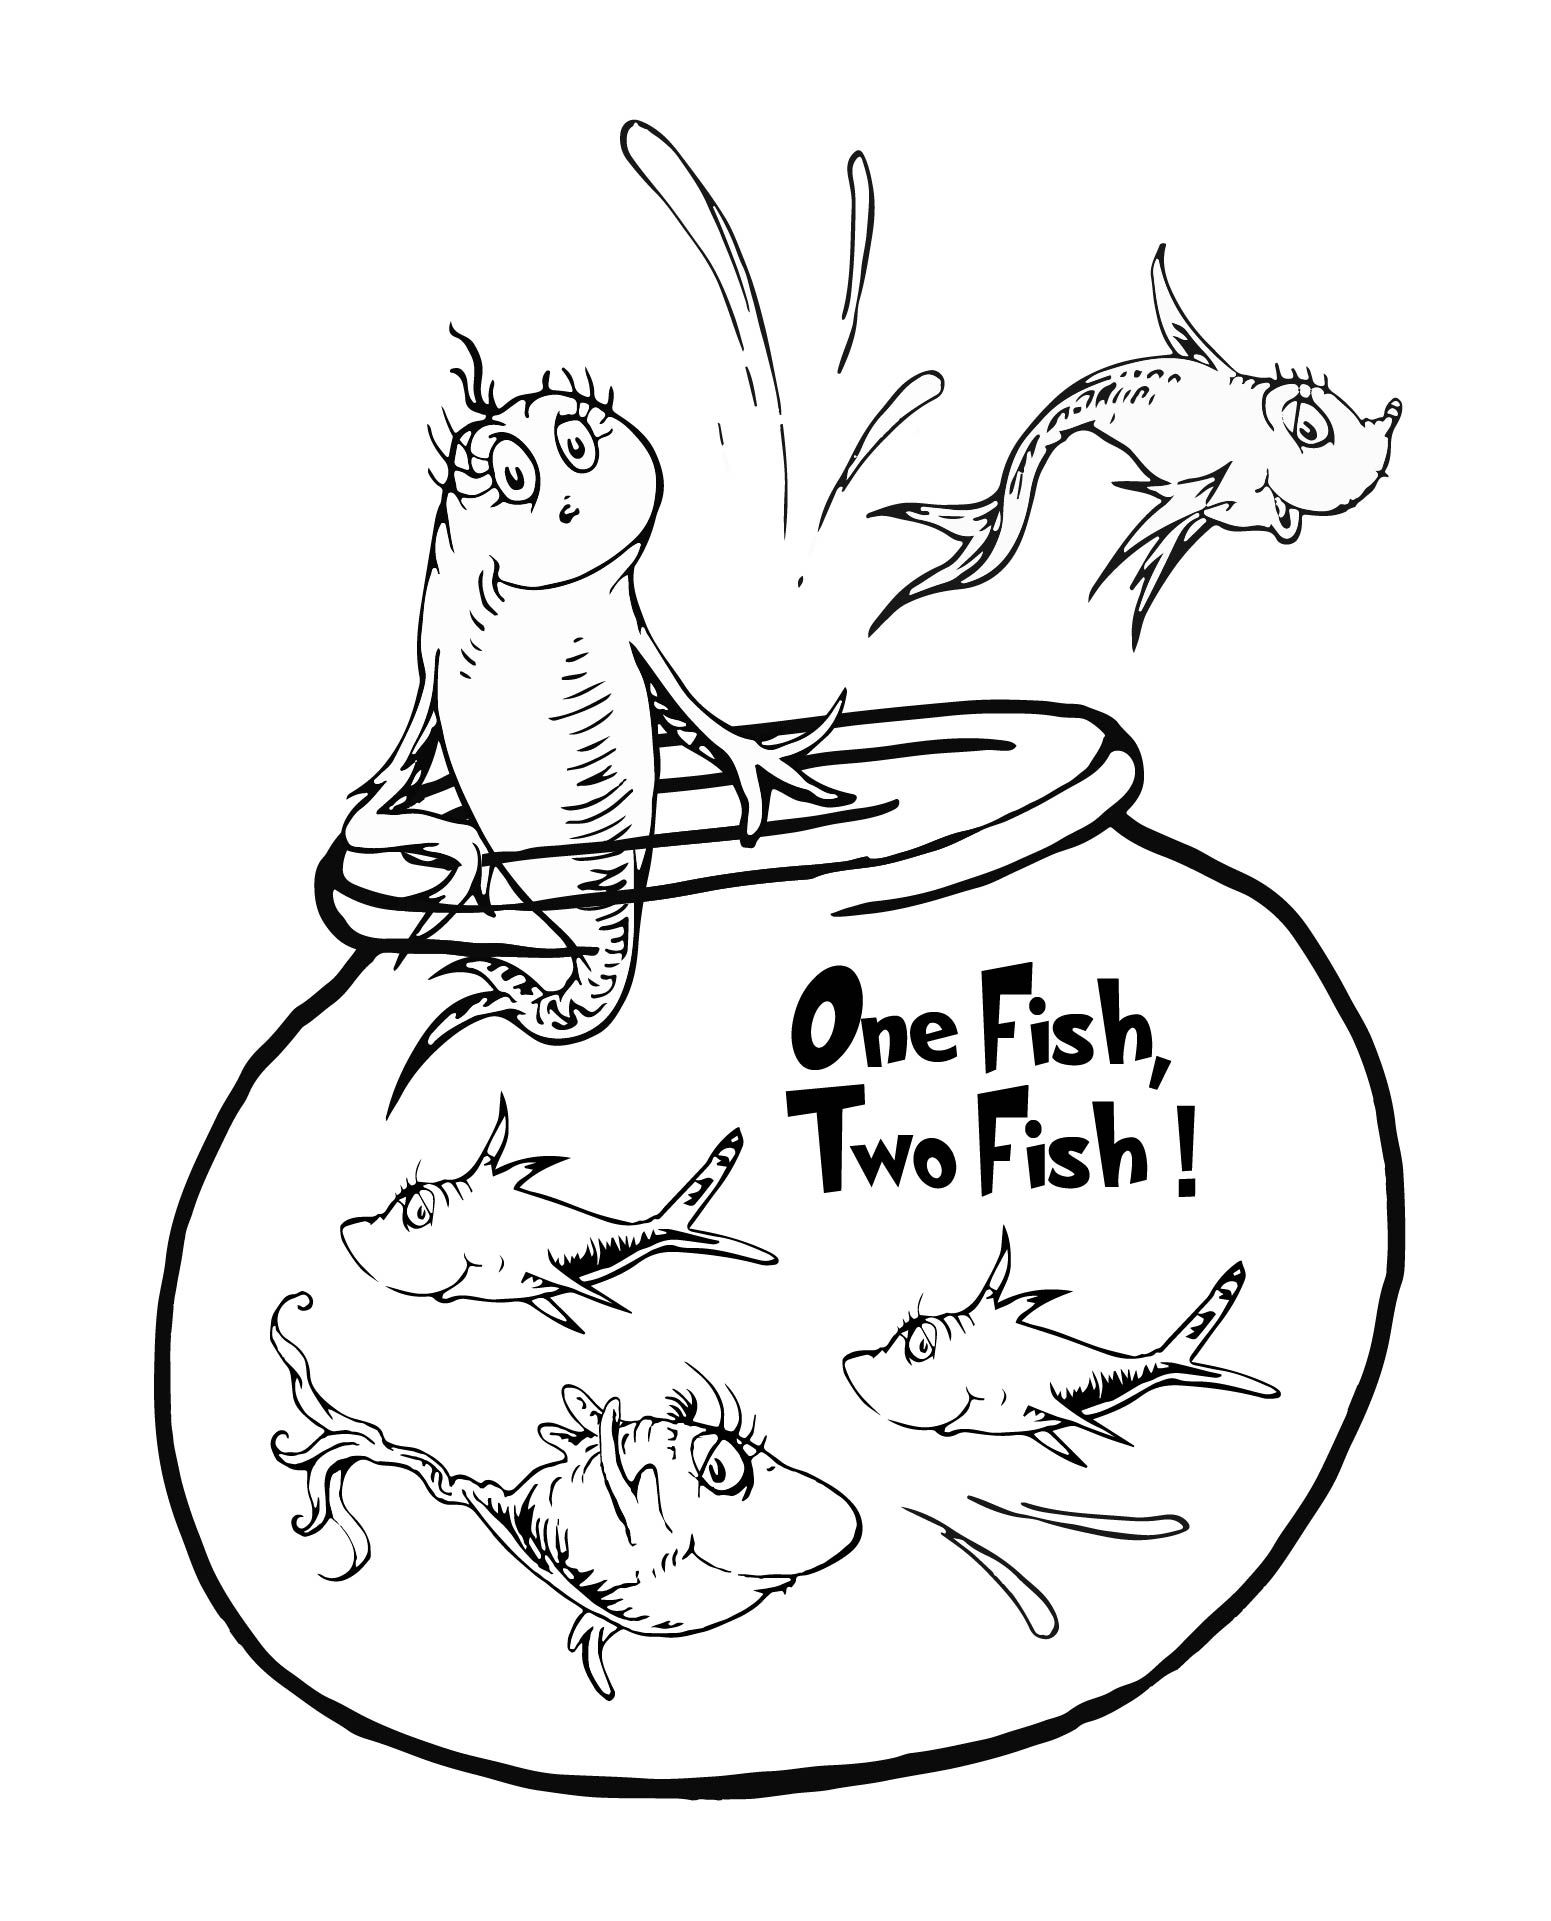 9 Best Images of One Fish Two Fish Coloring Pages Printable Dr. Seuss